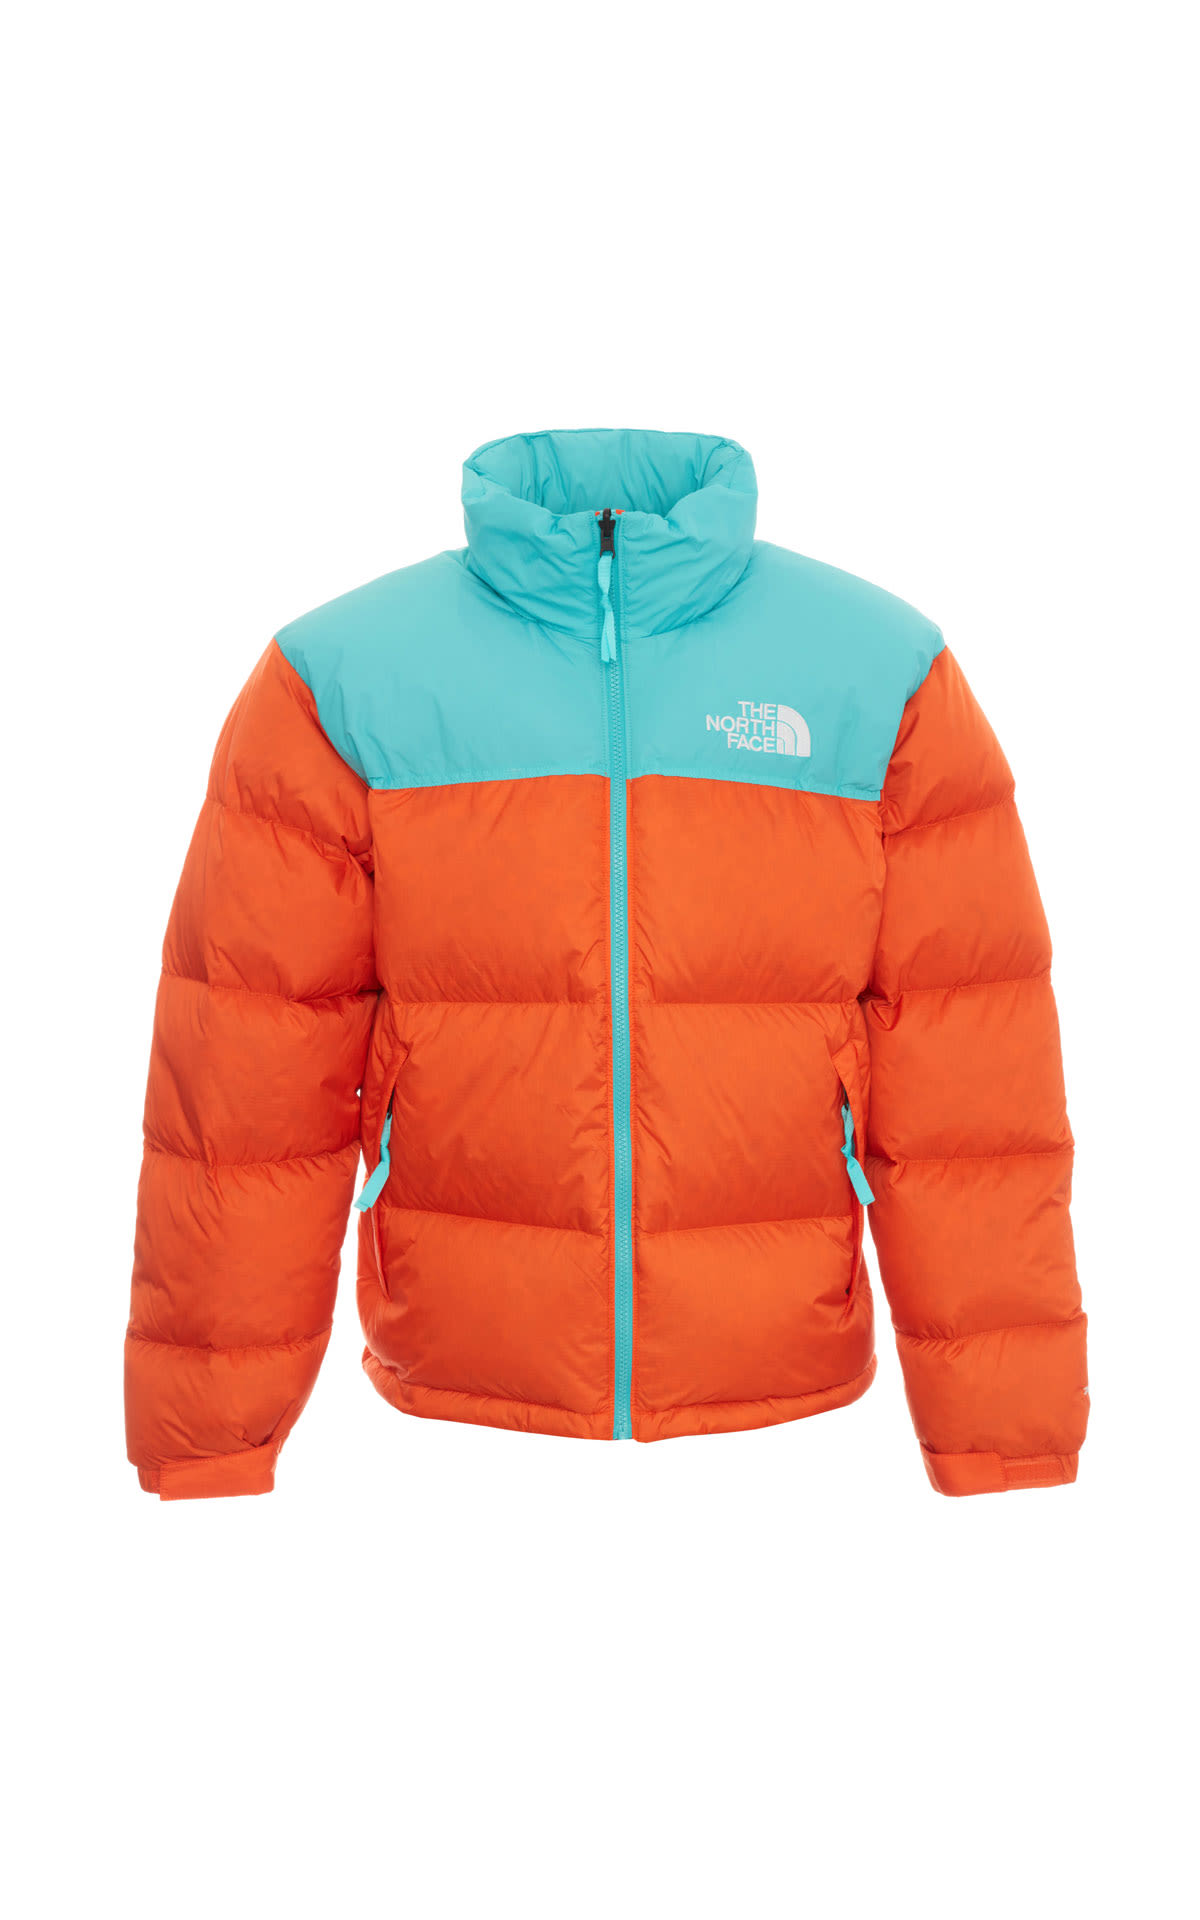 The North Face Retro nuptse jacket from Bicester Village